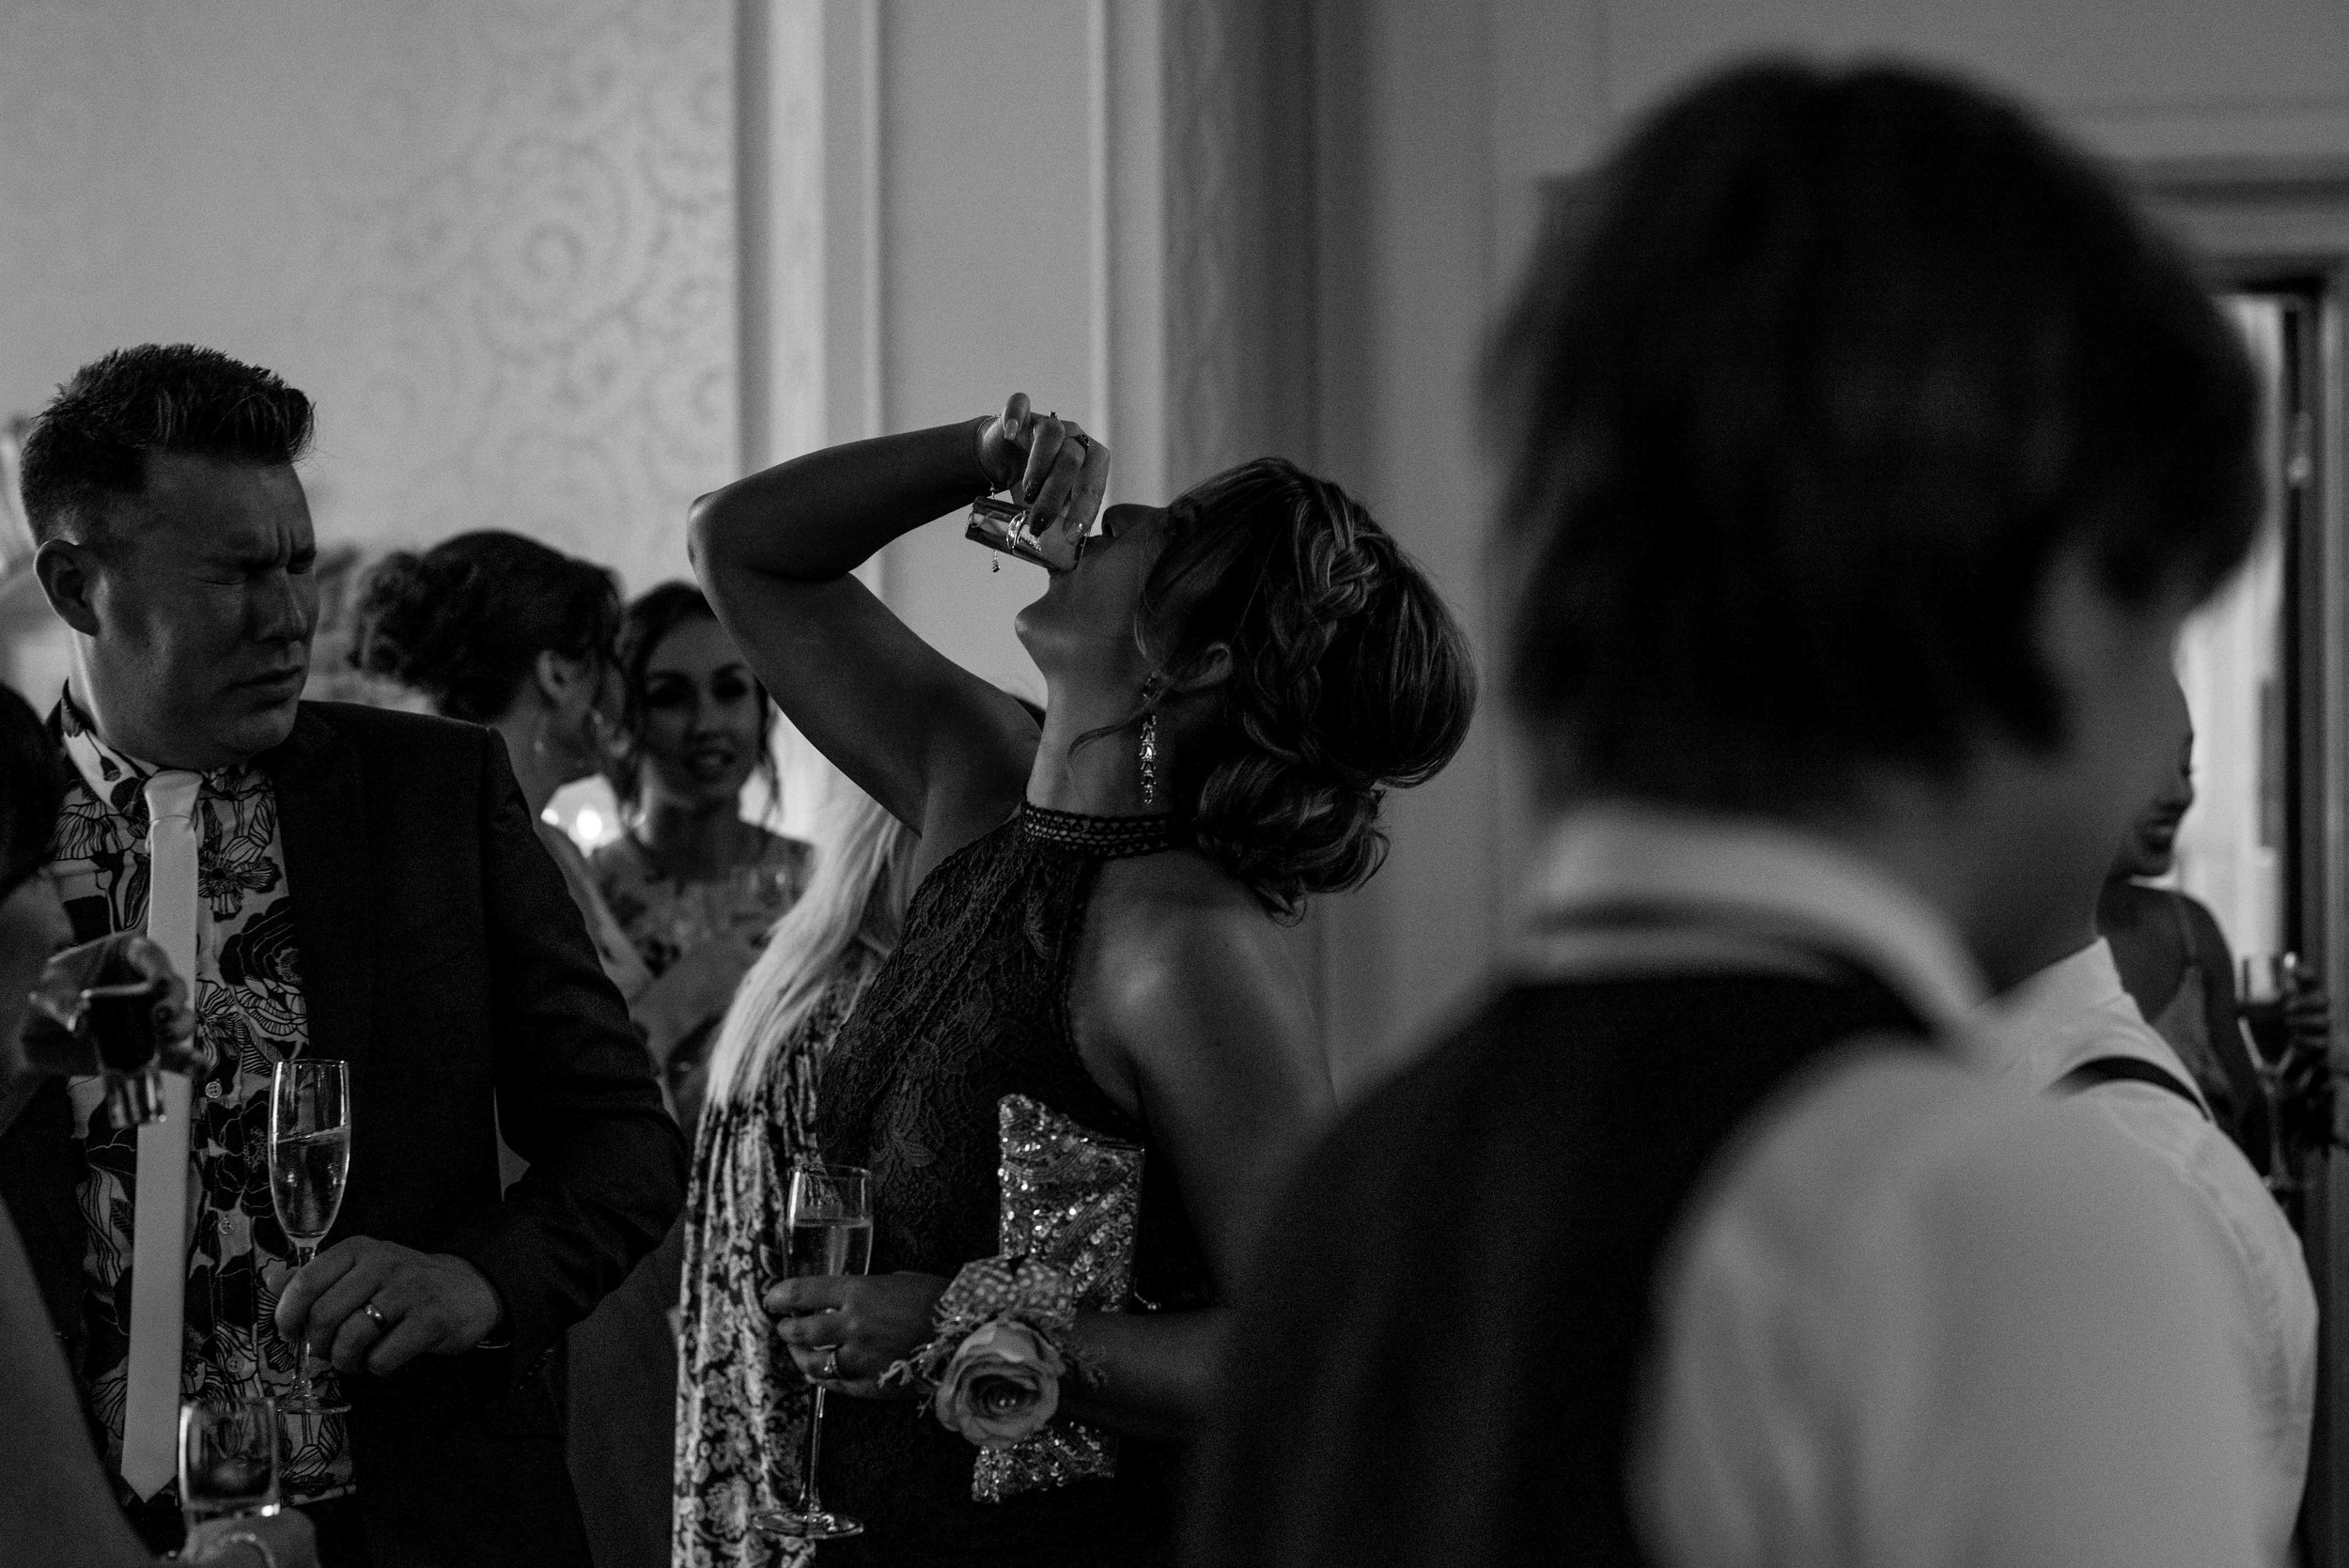 A wedding guest puts her head back to swallow a vodka shot